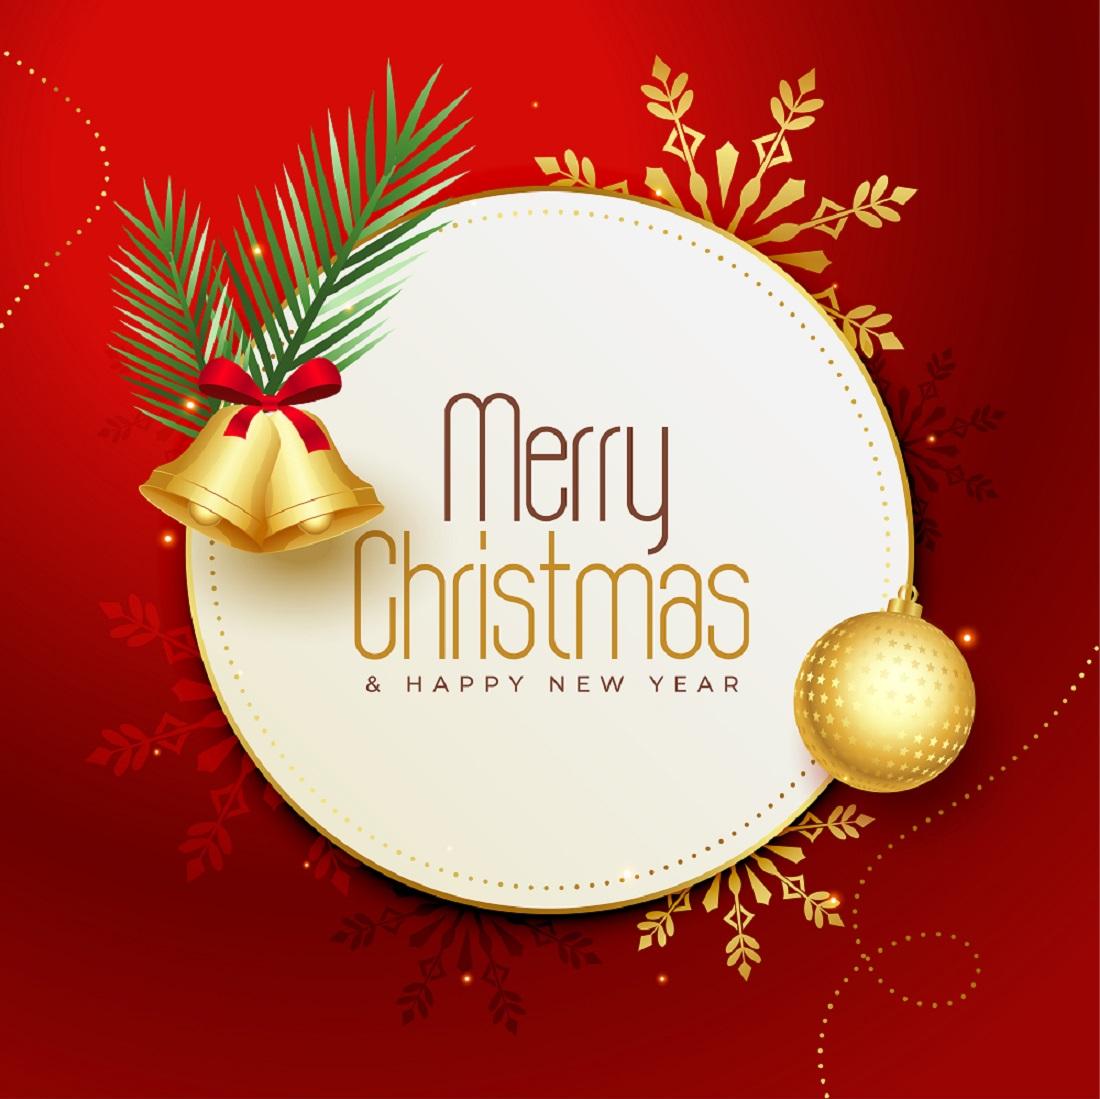 Merry Christmas And Happy New Year Image